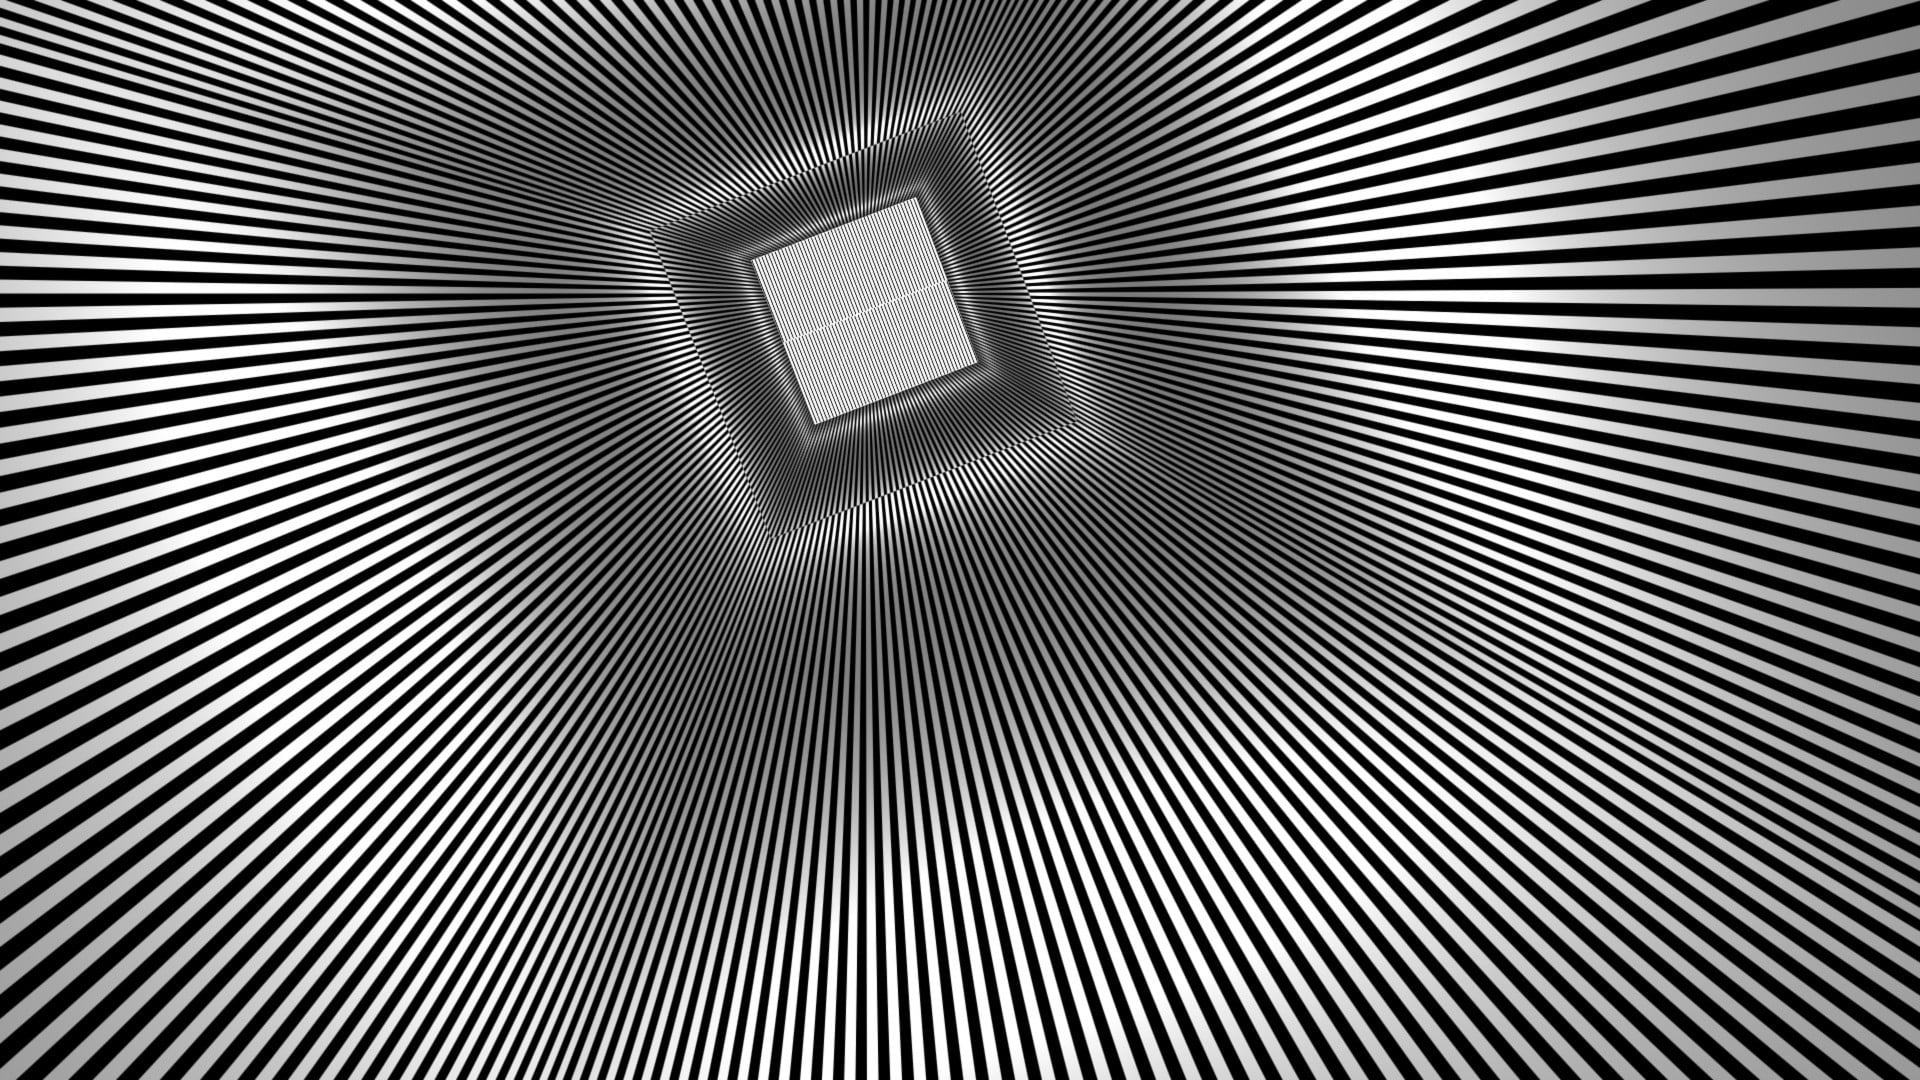 optical illusion, abstract, lines, digital art, monochrome, pattern